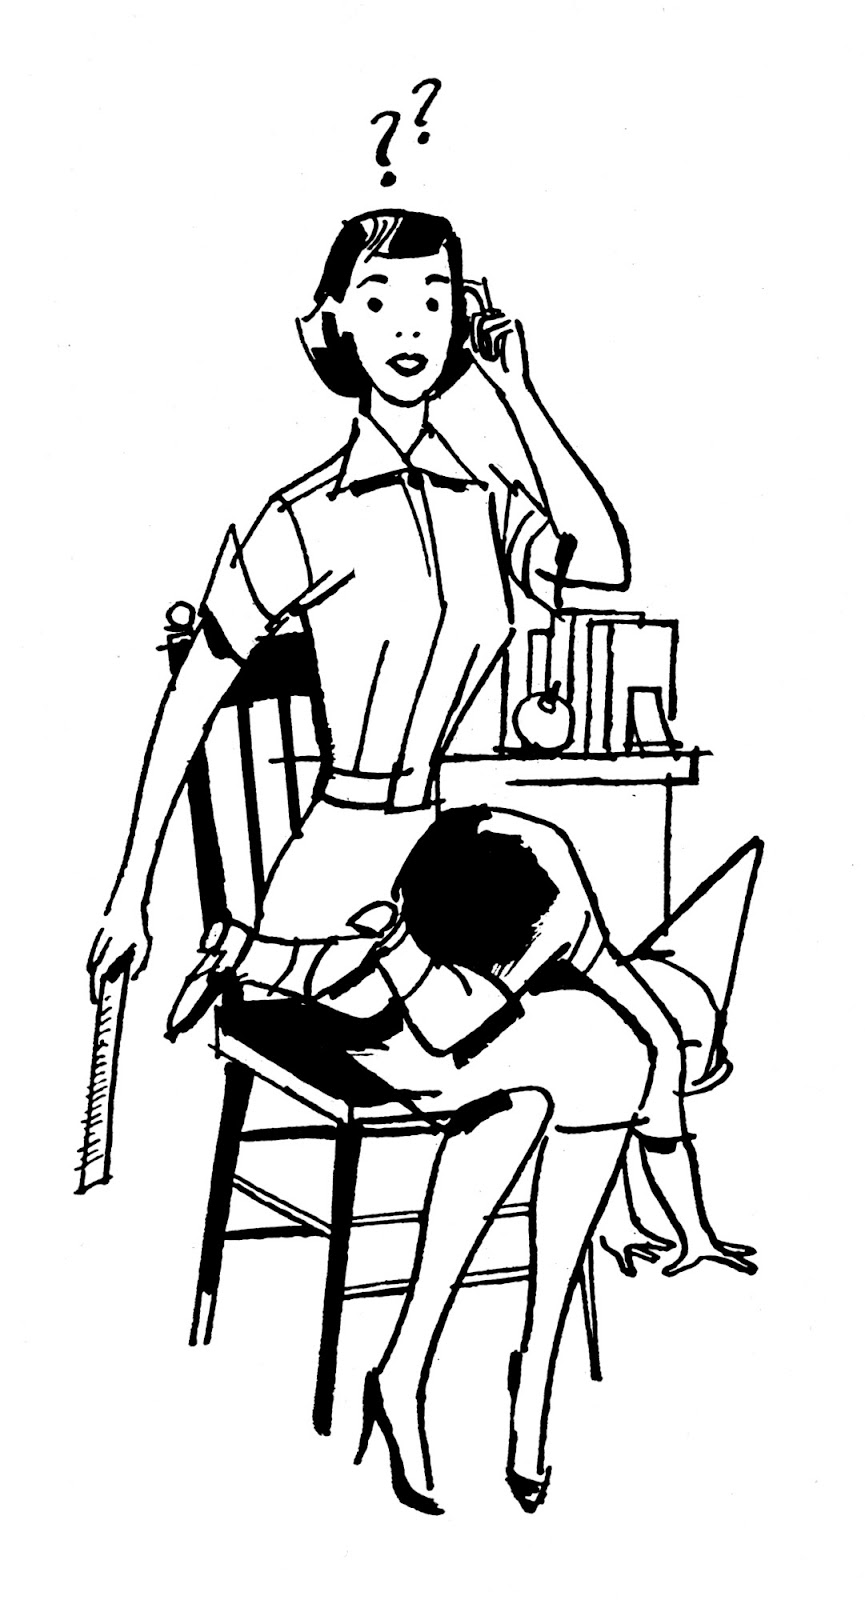 A Slapping Clipart man is seated in a chair.